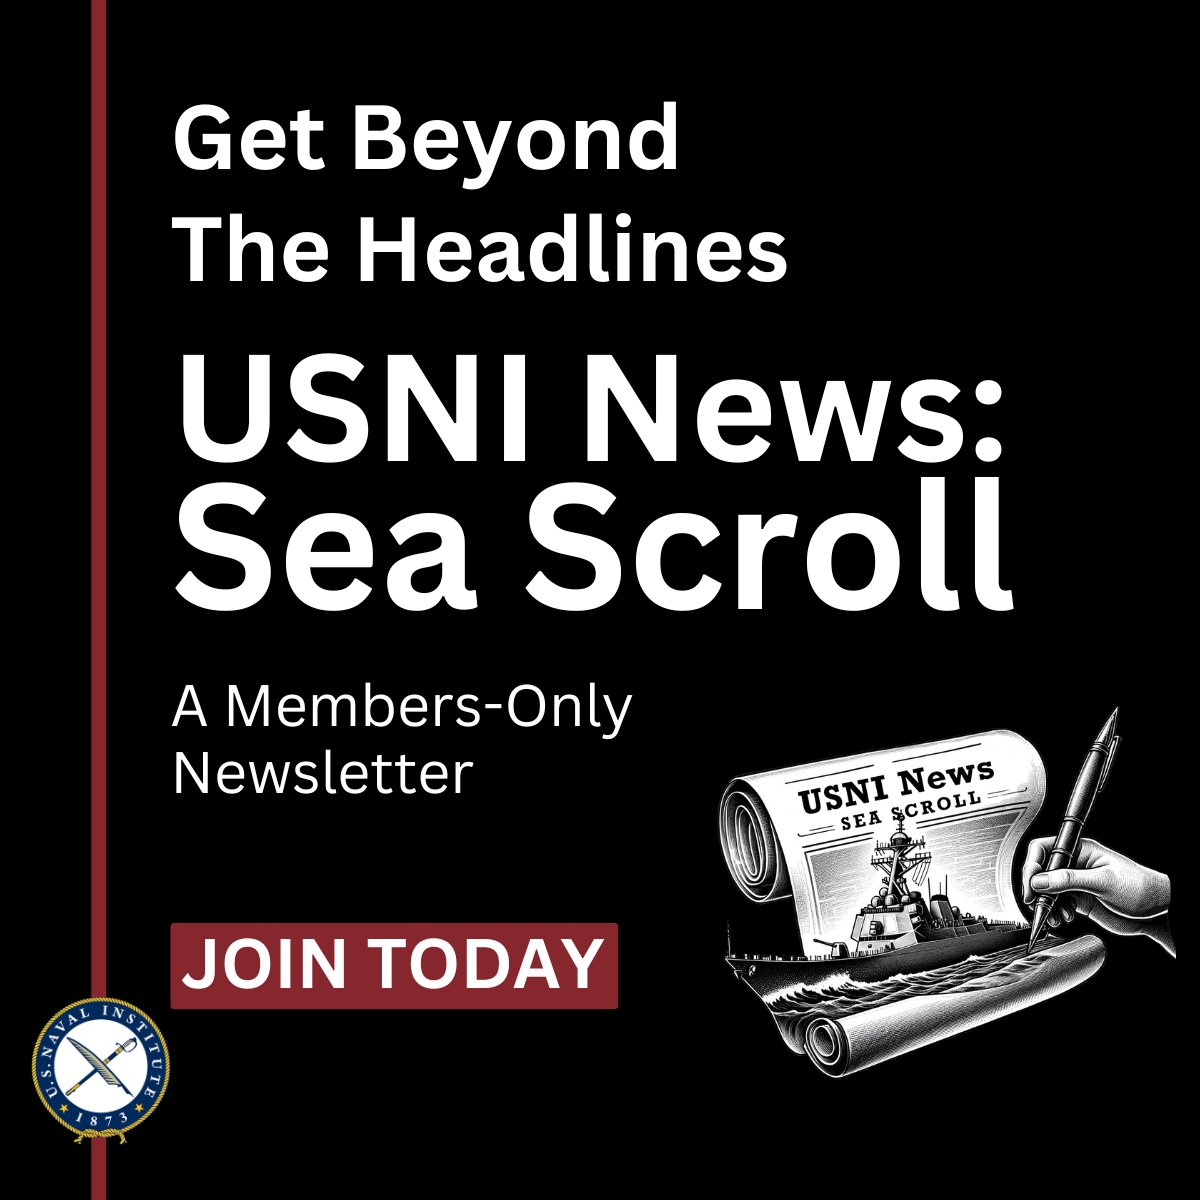 Love USNI News? Want more? Join the U.S. Naval Institute and receive our weekly member-exclusive #newsletter USNI News: Sea Scroll every Thursday! Get #BeyondTheHeadlines with exclusive #insight and #analysis. Sign up today: #StayInTheKnow #USNINews #Newshttps://bit.ly/44kf0OV